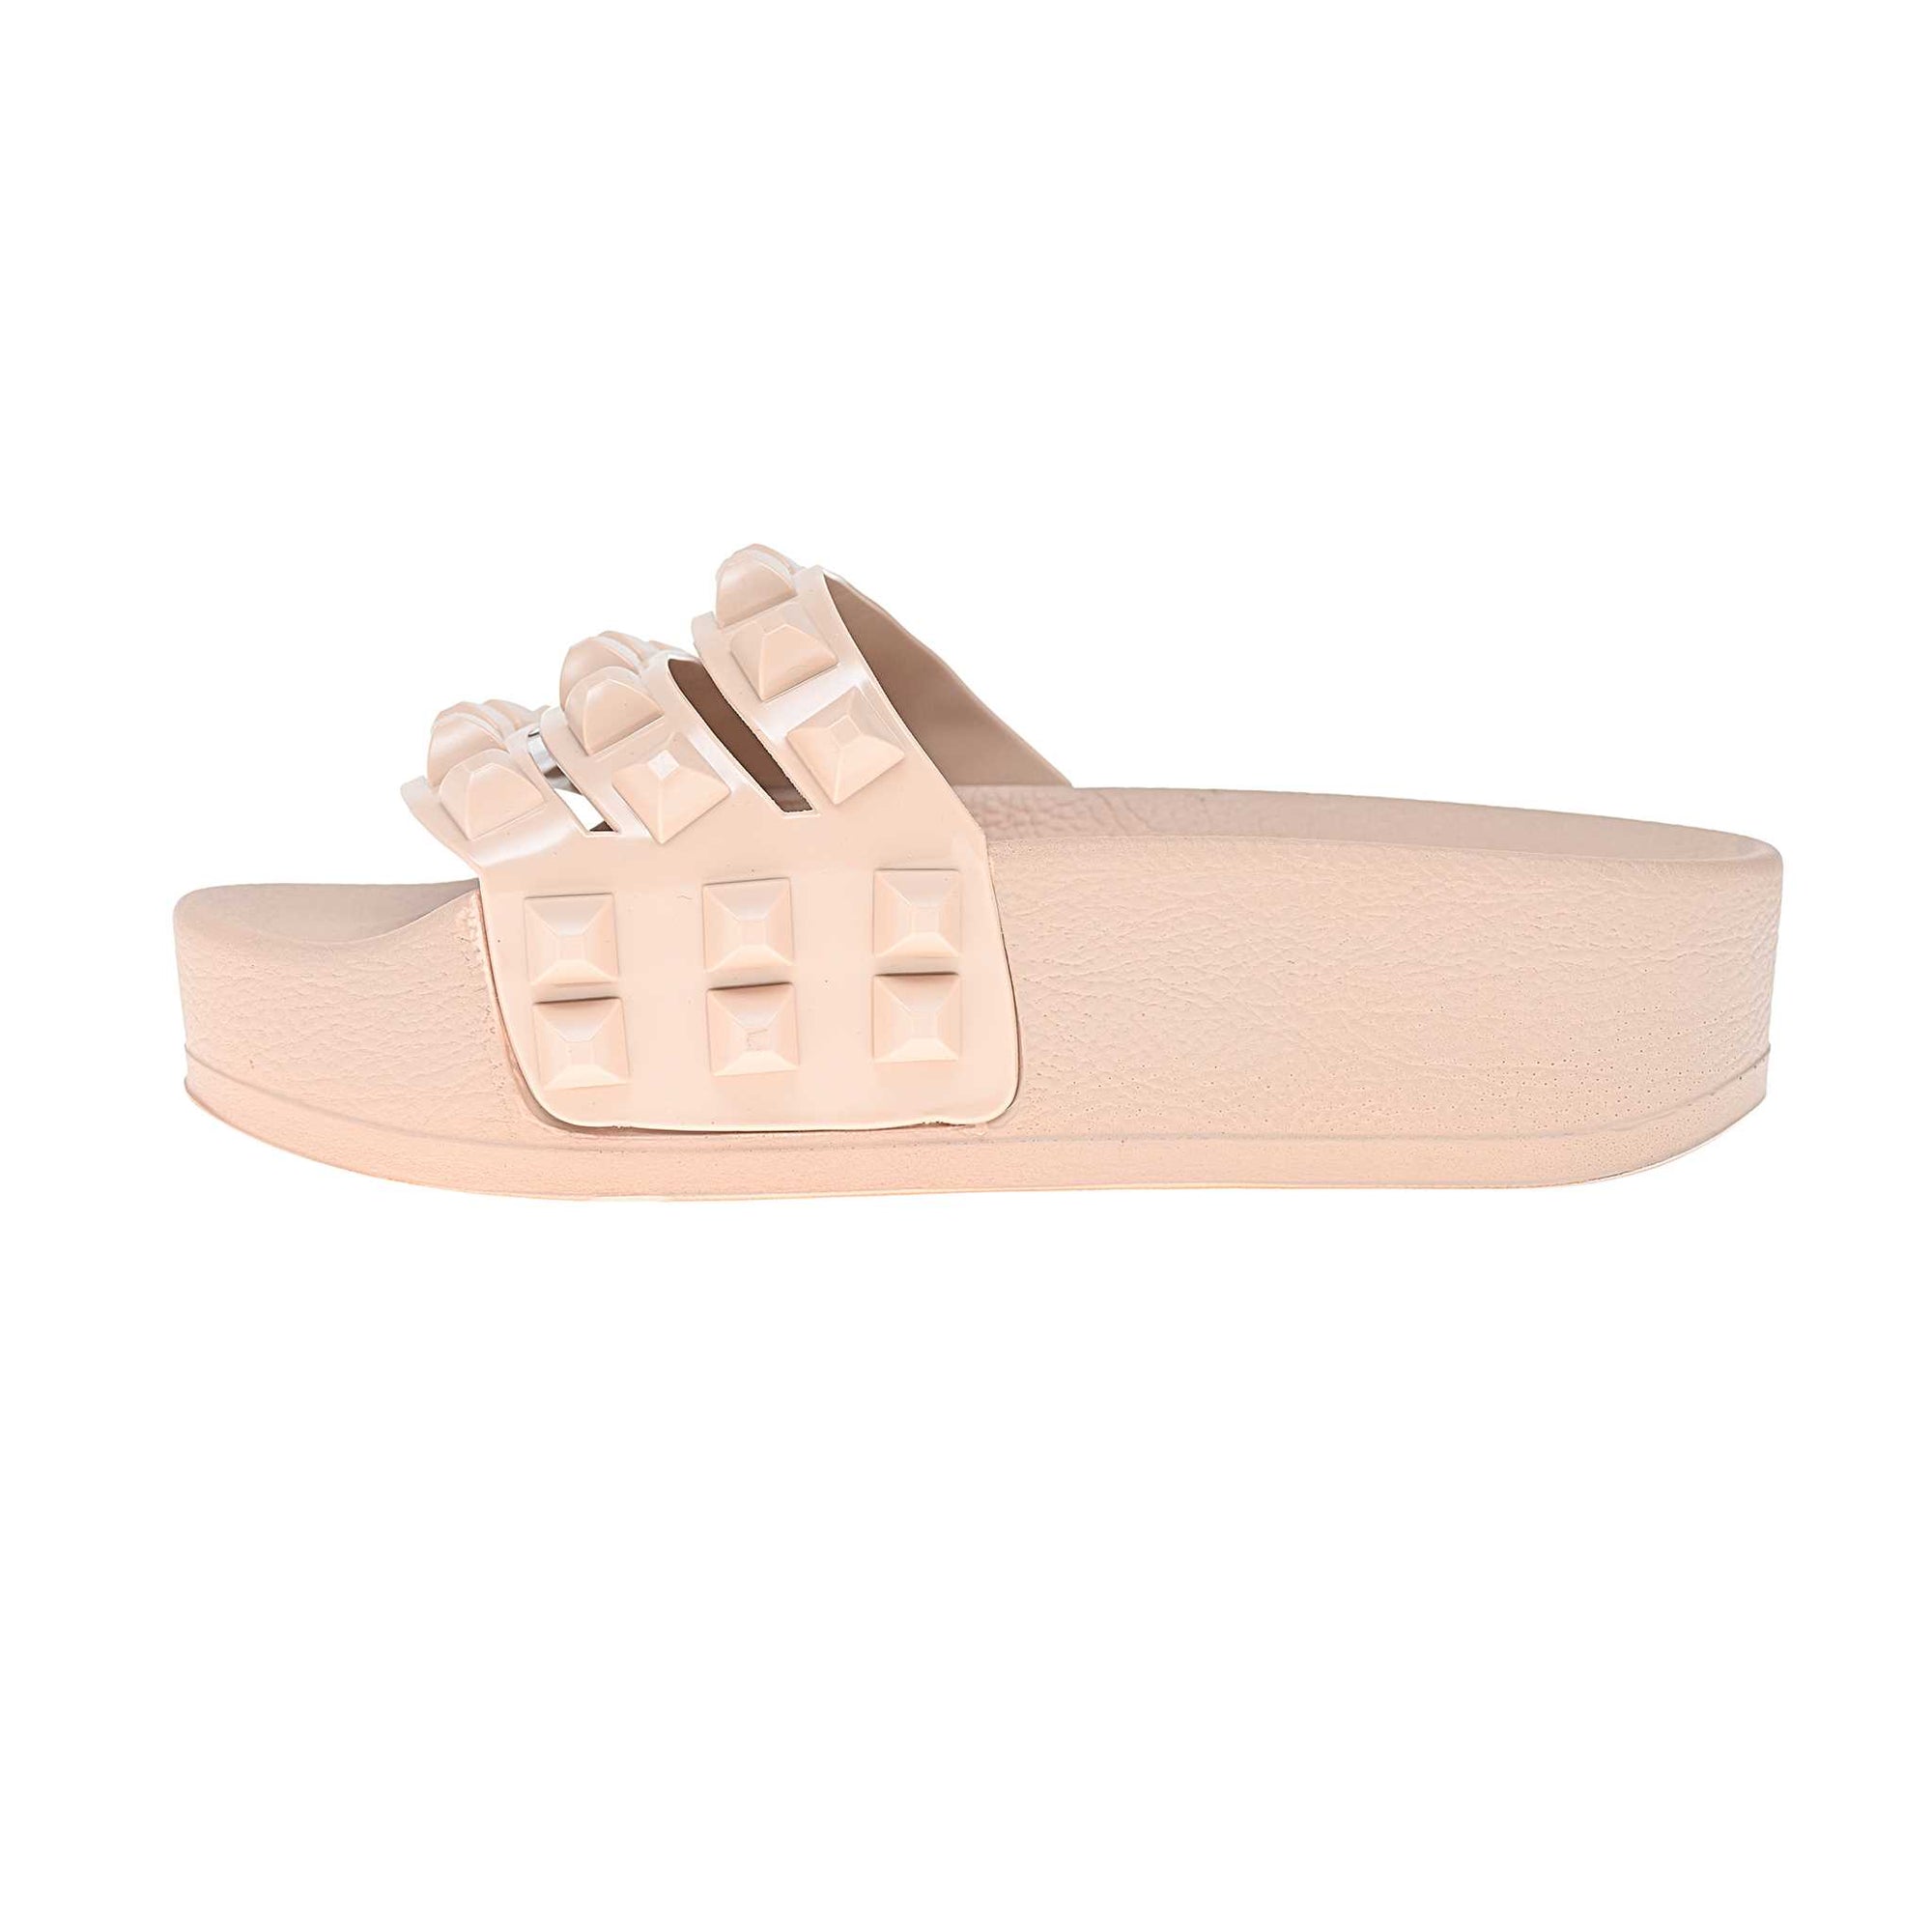 Carmen platform slides sandals Comfortable, stylish, and ready for beach or street look from Carmen Sol